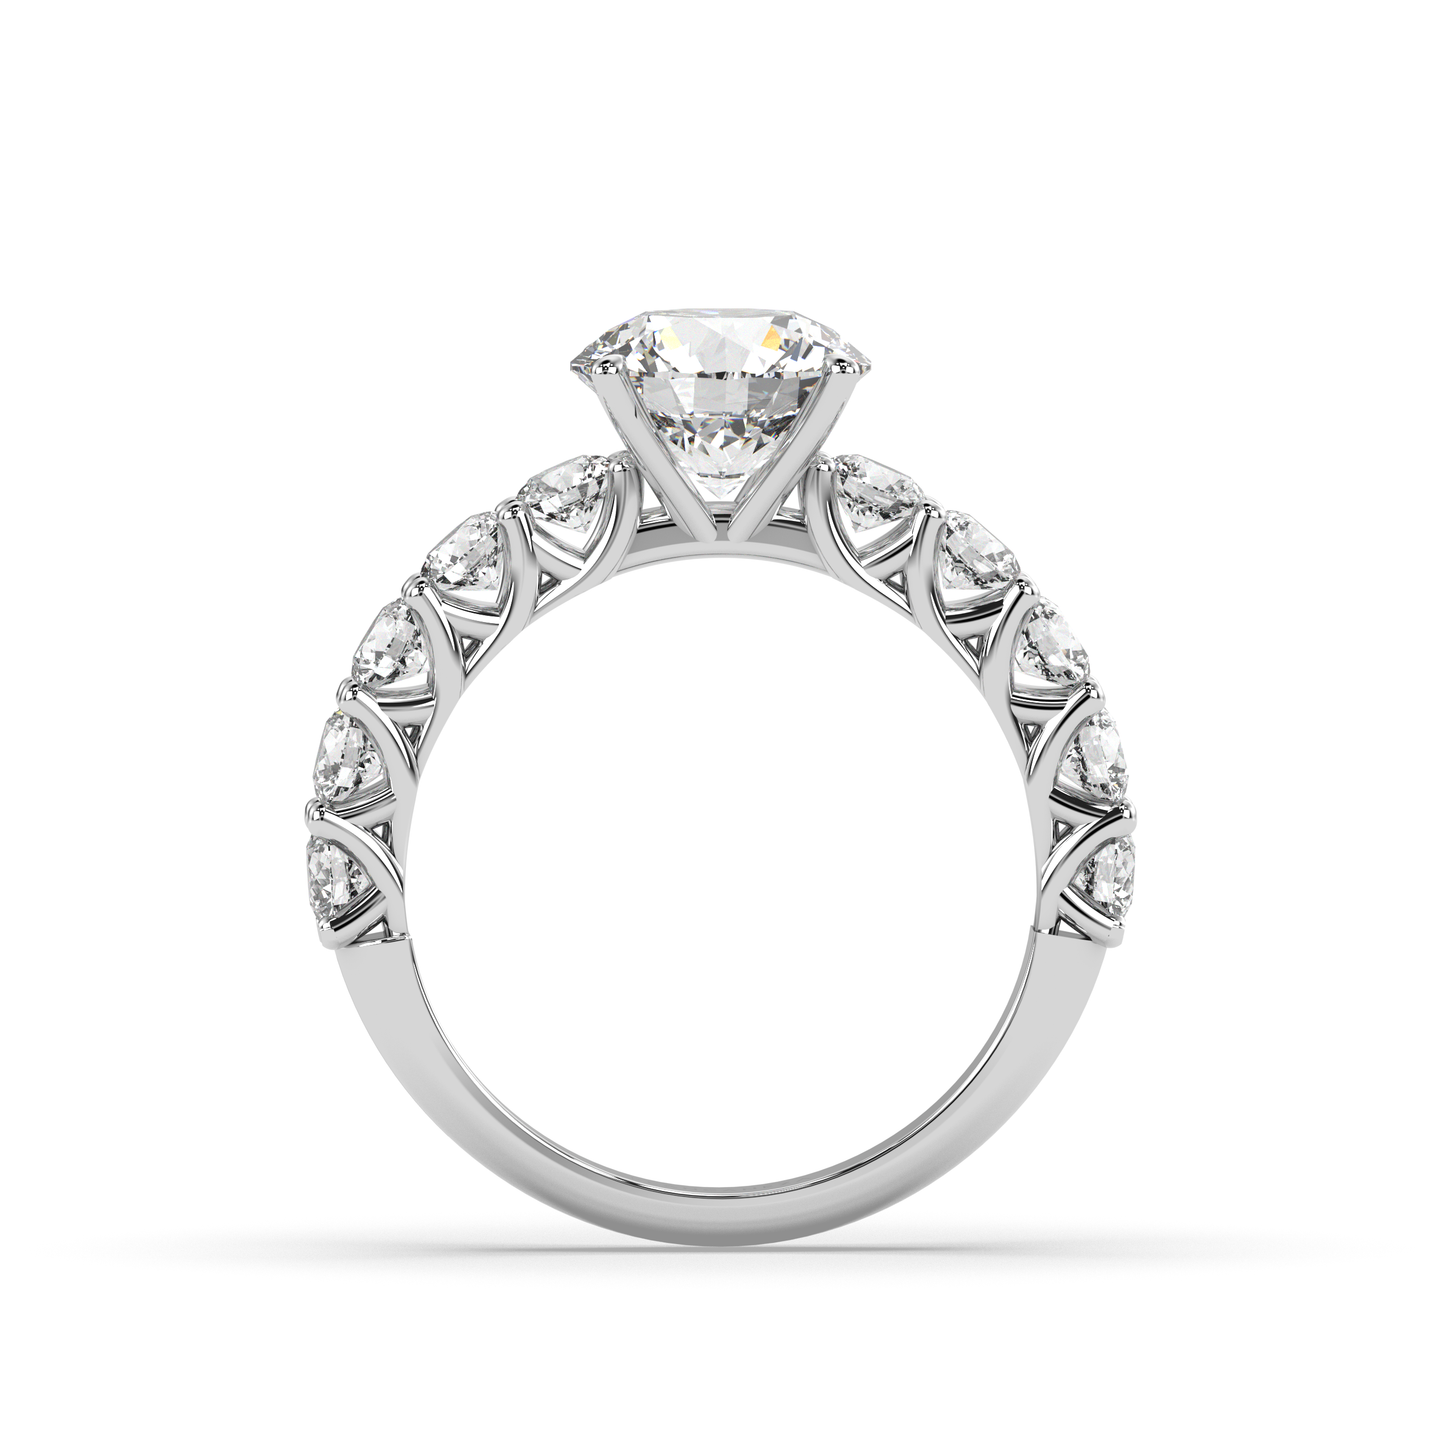 Ring Set simulated diamond crafted in sterling silver 18k white gold rhodium plated, standing side , main stone size 8mm